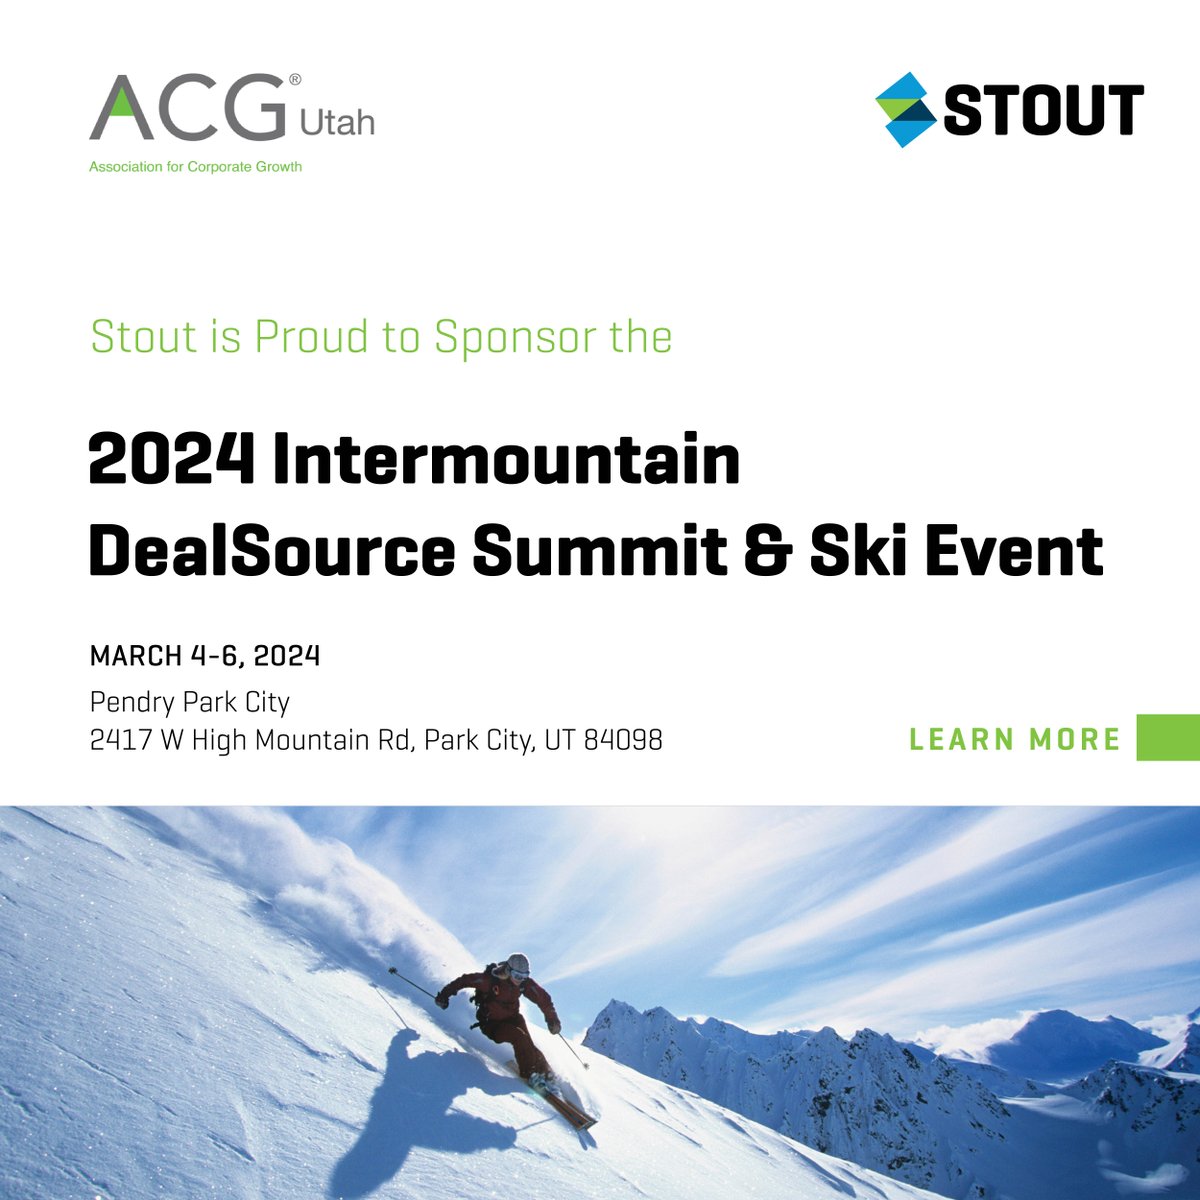 Stout is thrilled to sponsor ACG Utah's 2024 Intermountain DealSource Summit & Ski Event! Join us at Stout's DealSource Lounge table for insightful conversations and networking opportunities. Learn more here: bit.ly/3tJCXkV